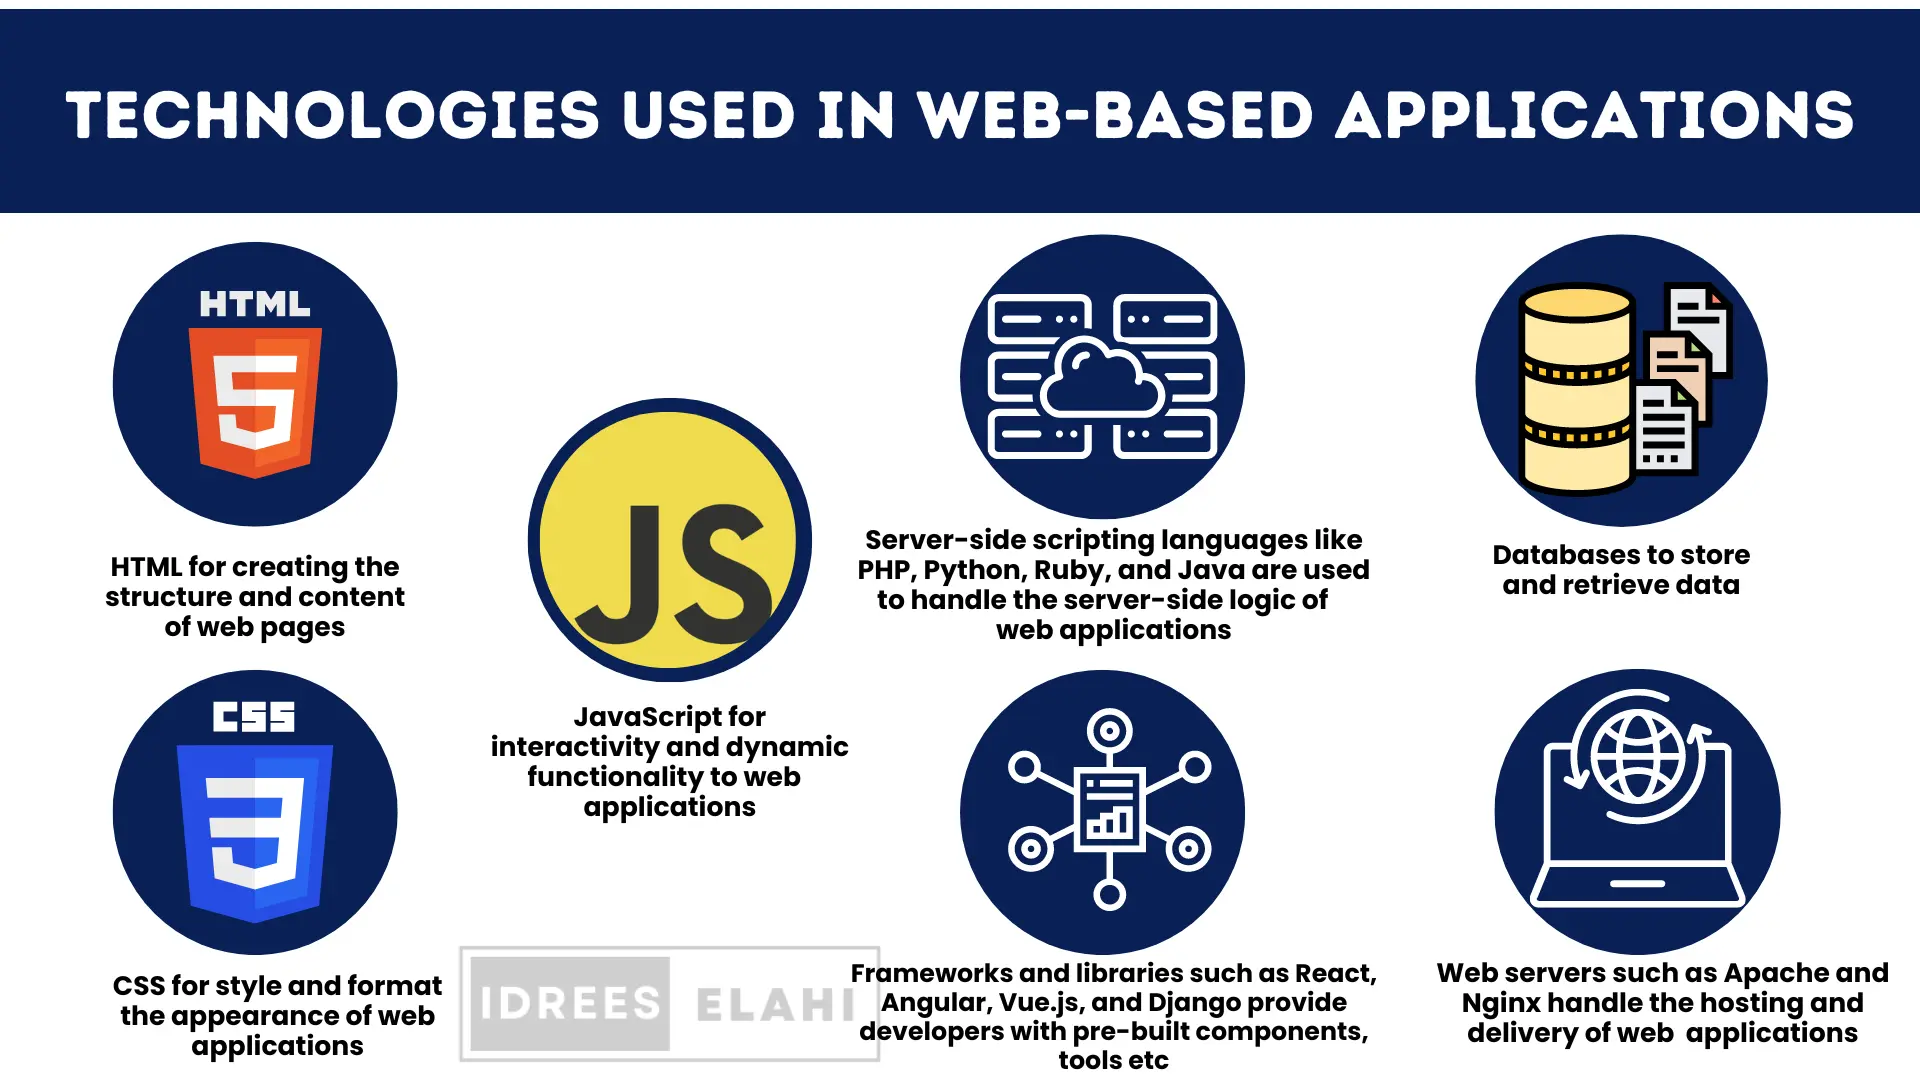 Technologies Used In Web-Based Applications